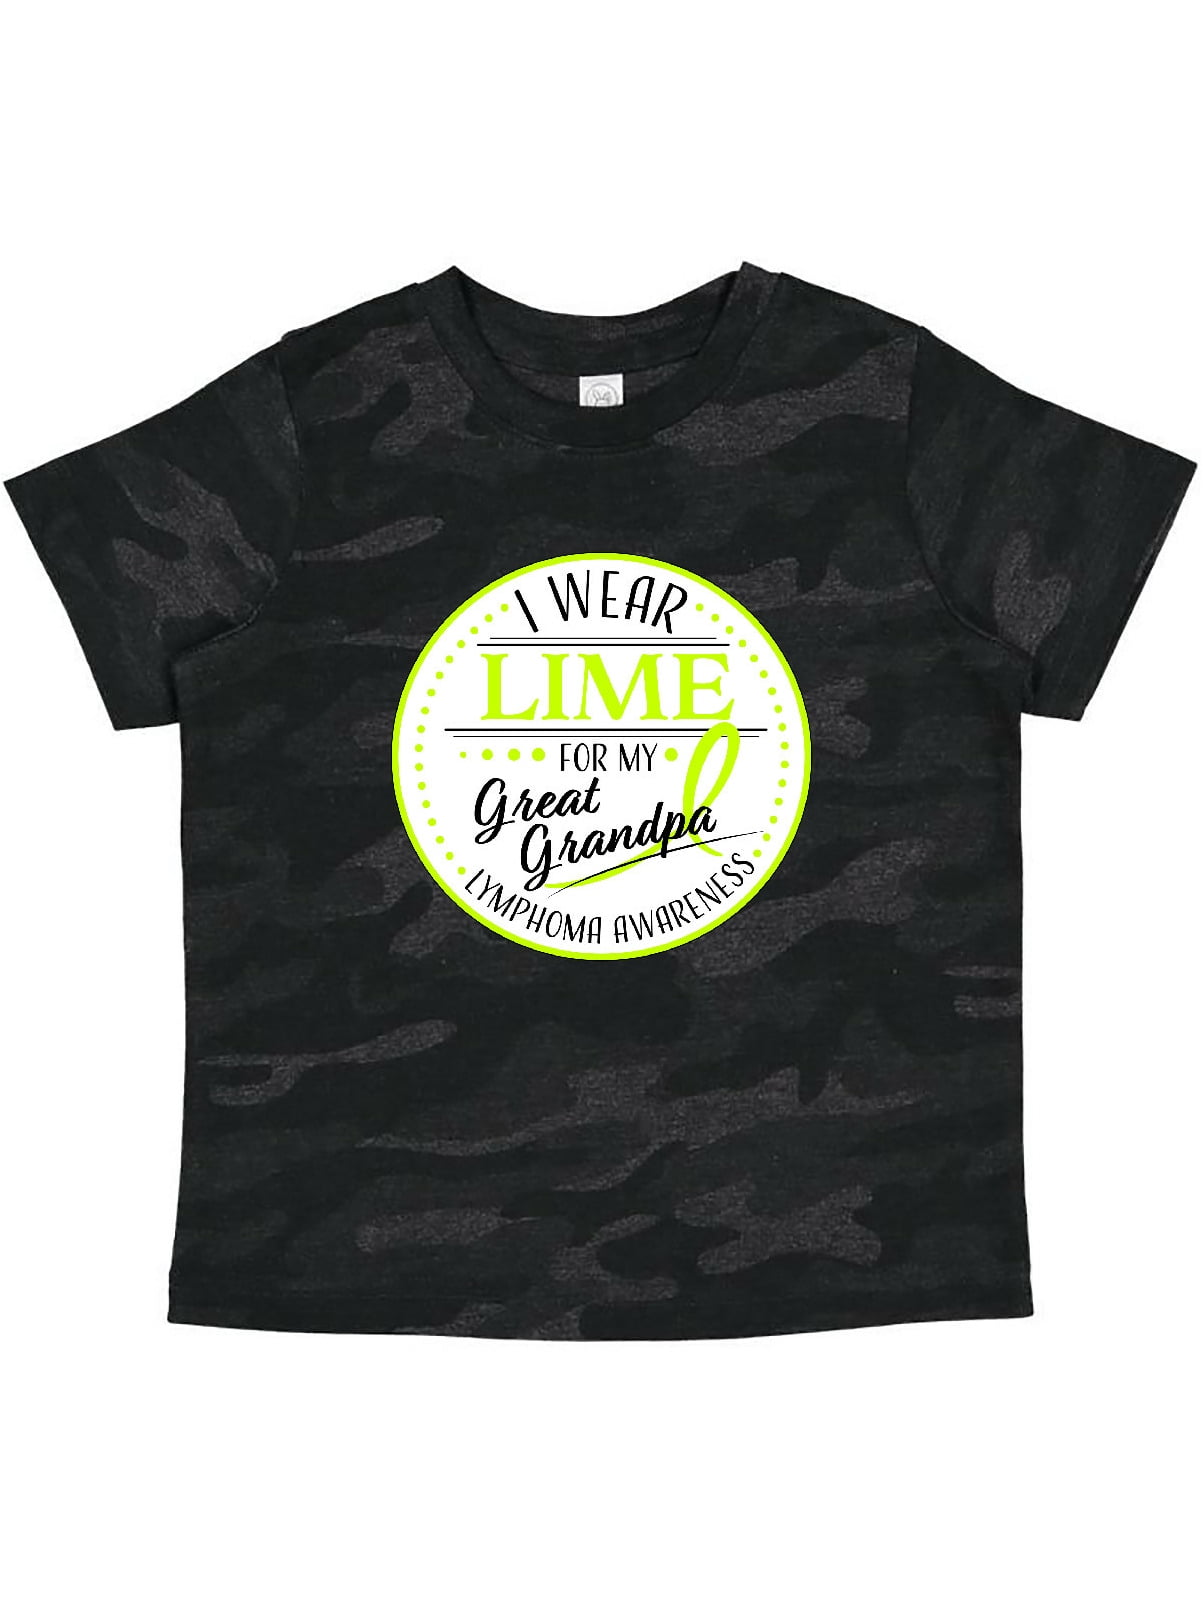 inktastic I Wear Lime for My Gramps Lymphoma Awareness Baby T-Shirt 